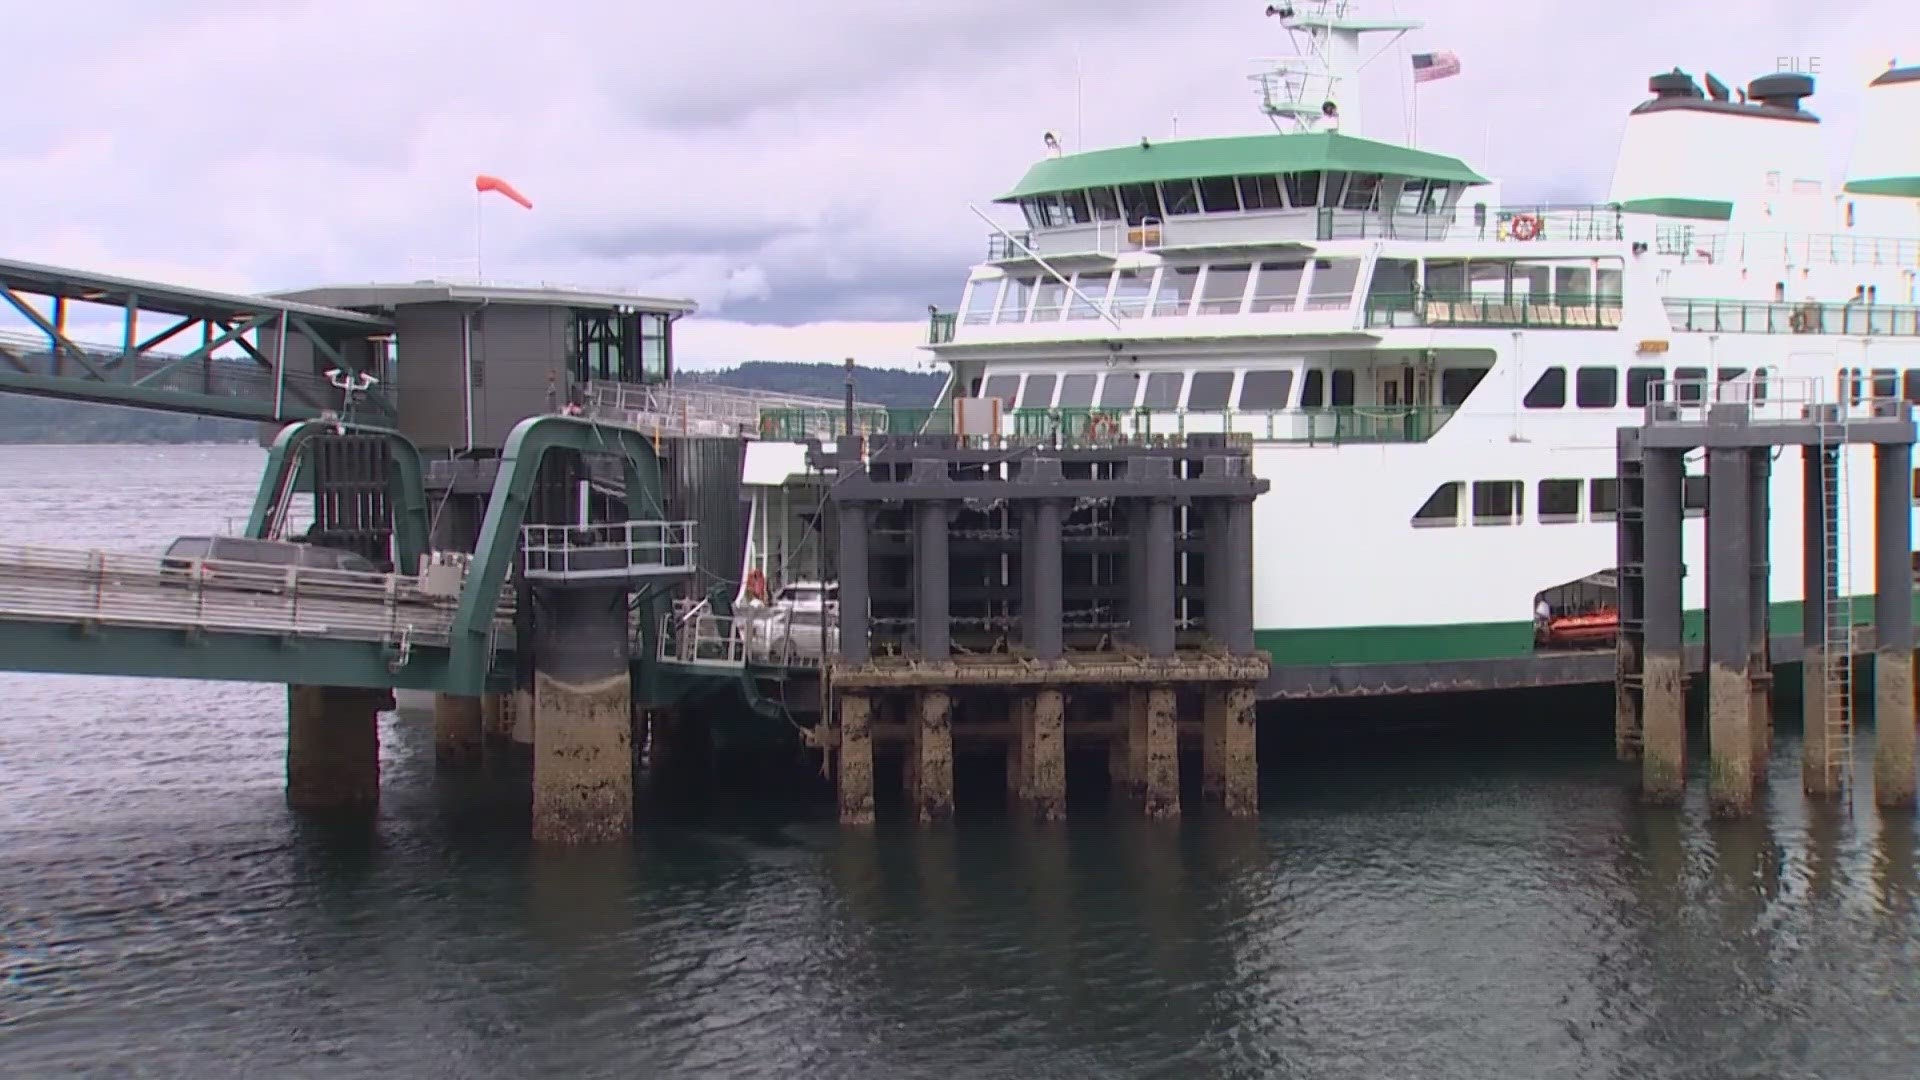 Mechanical and staffing issues have plagued Washington State Ferries this year. A spokesperson said new boats are not expected to be added until around 2028.